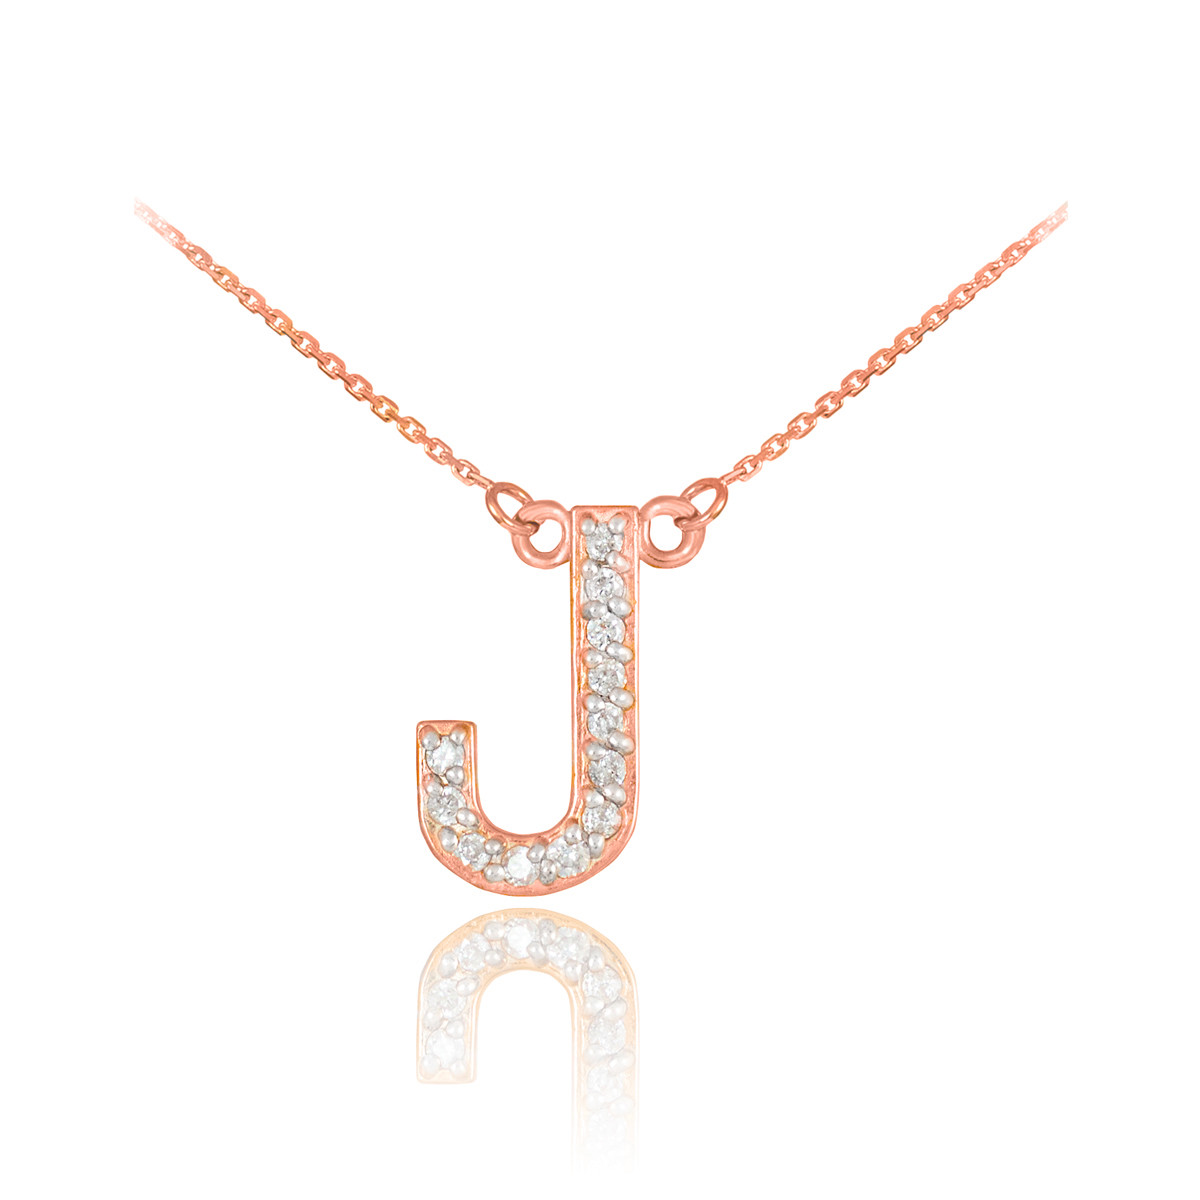 J Bold Initial Gold Necklace | Astrid & Miyu Necklaces